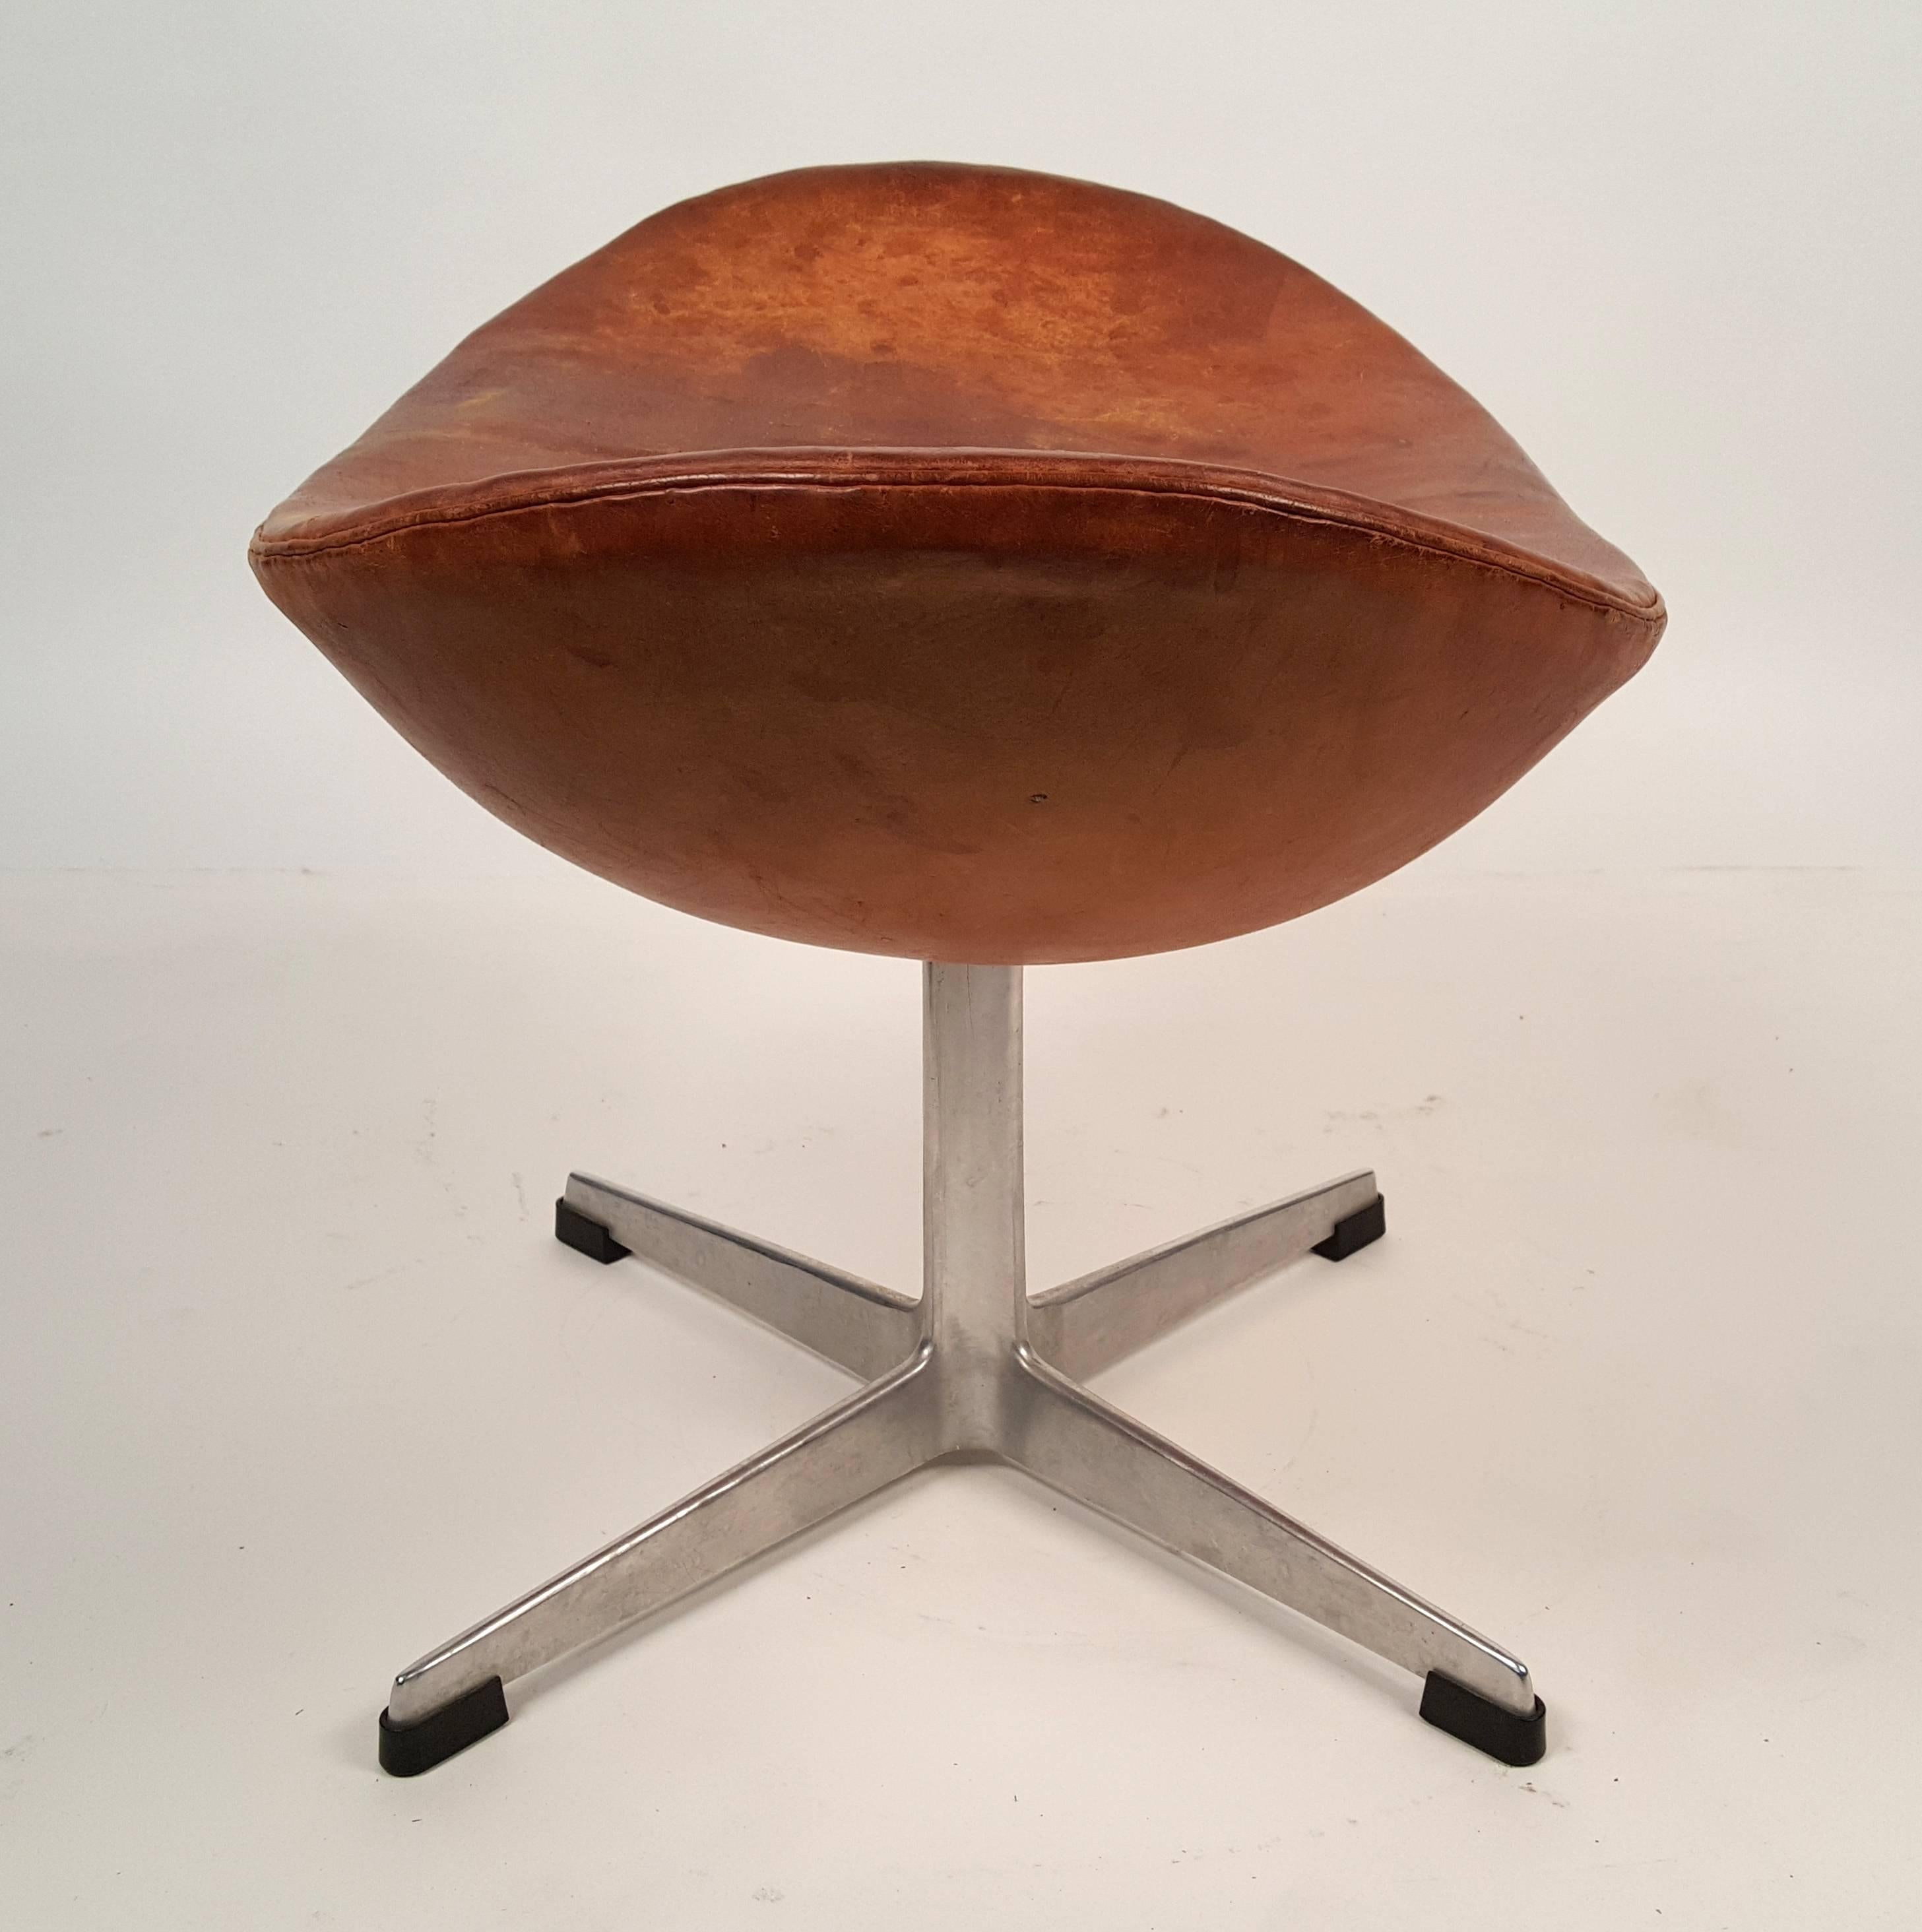 Mid-20th Century Arne Jacobsen Cognac Leather Egg Chair and Ottoman for Fritz Hansen